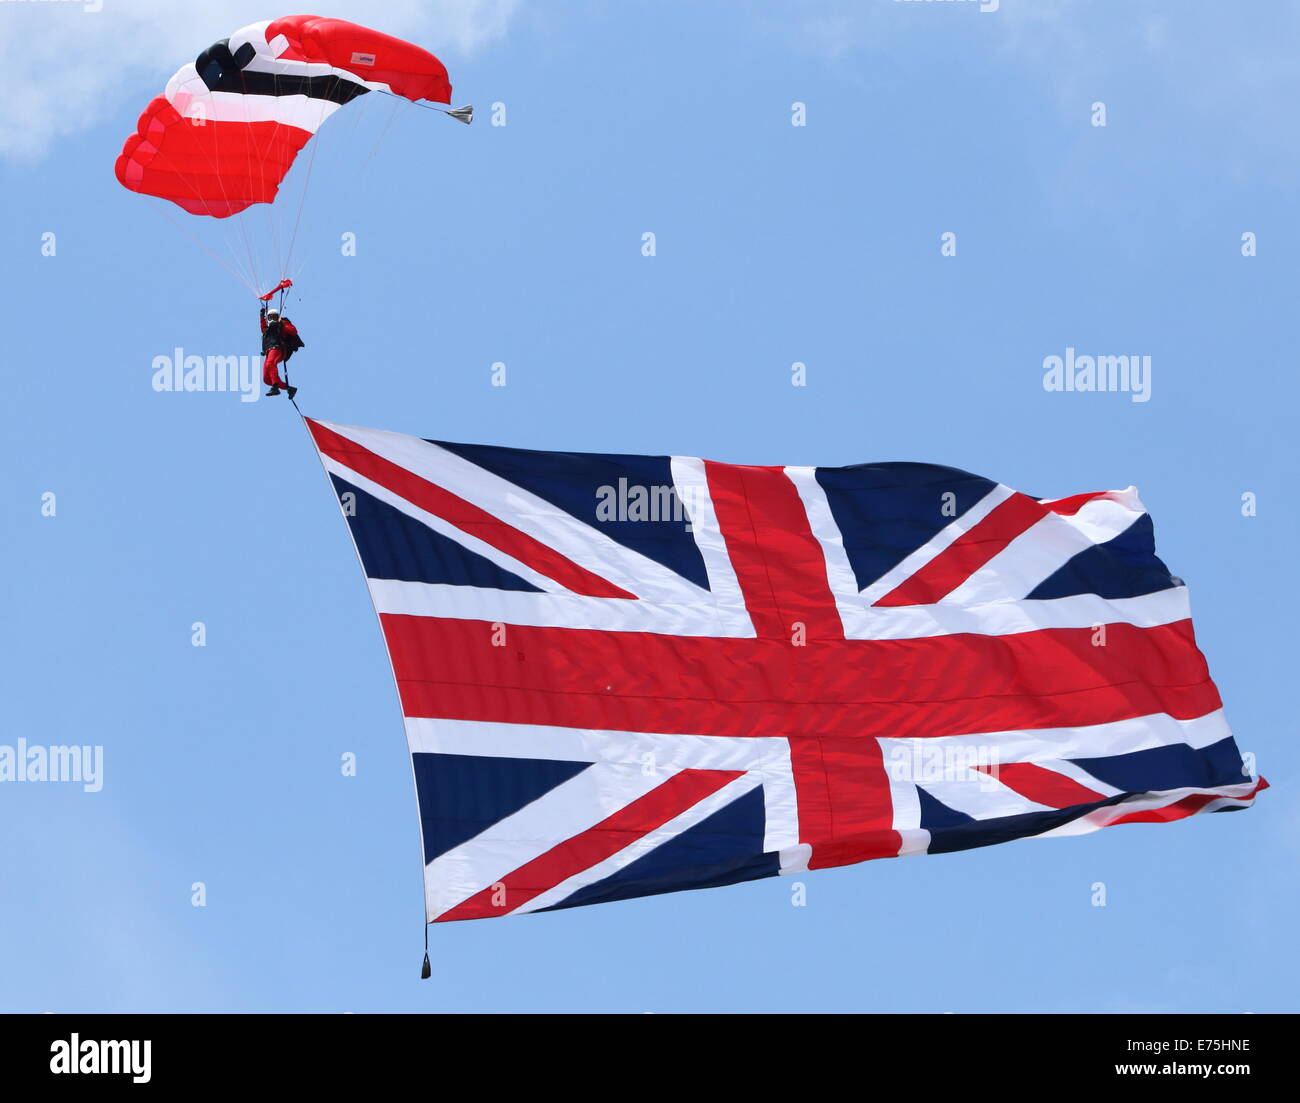 The Parachute Regiment's Red Devils parachute display team display a giant Union Jack flag during a jump in England. Stock Photo